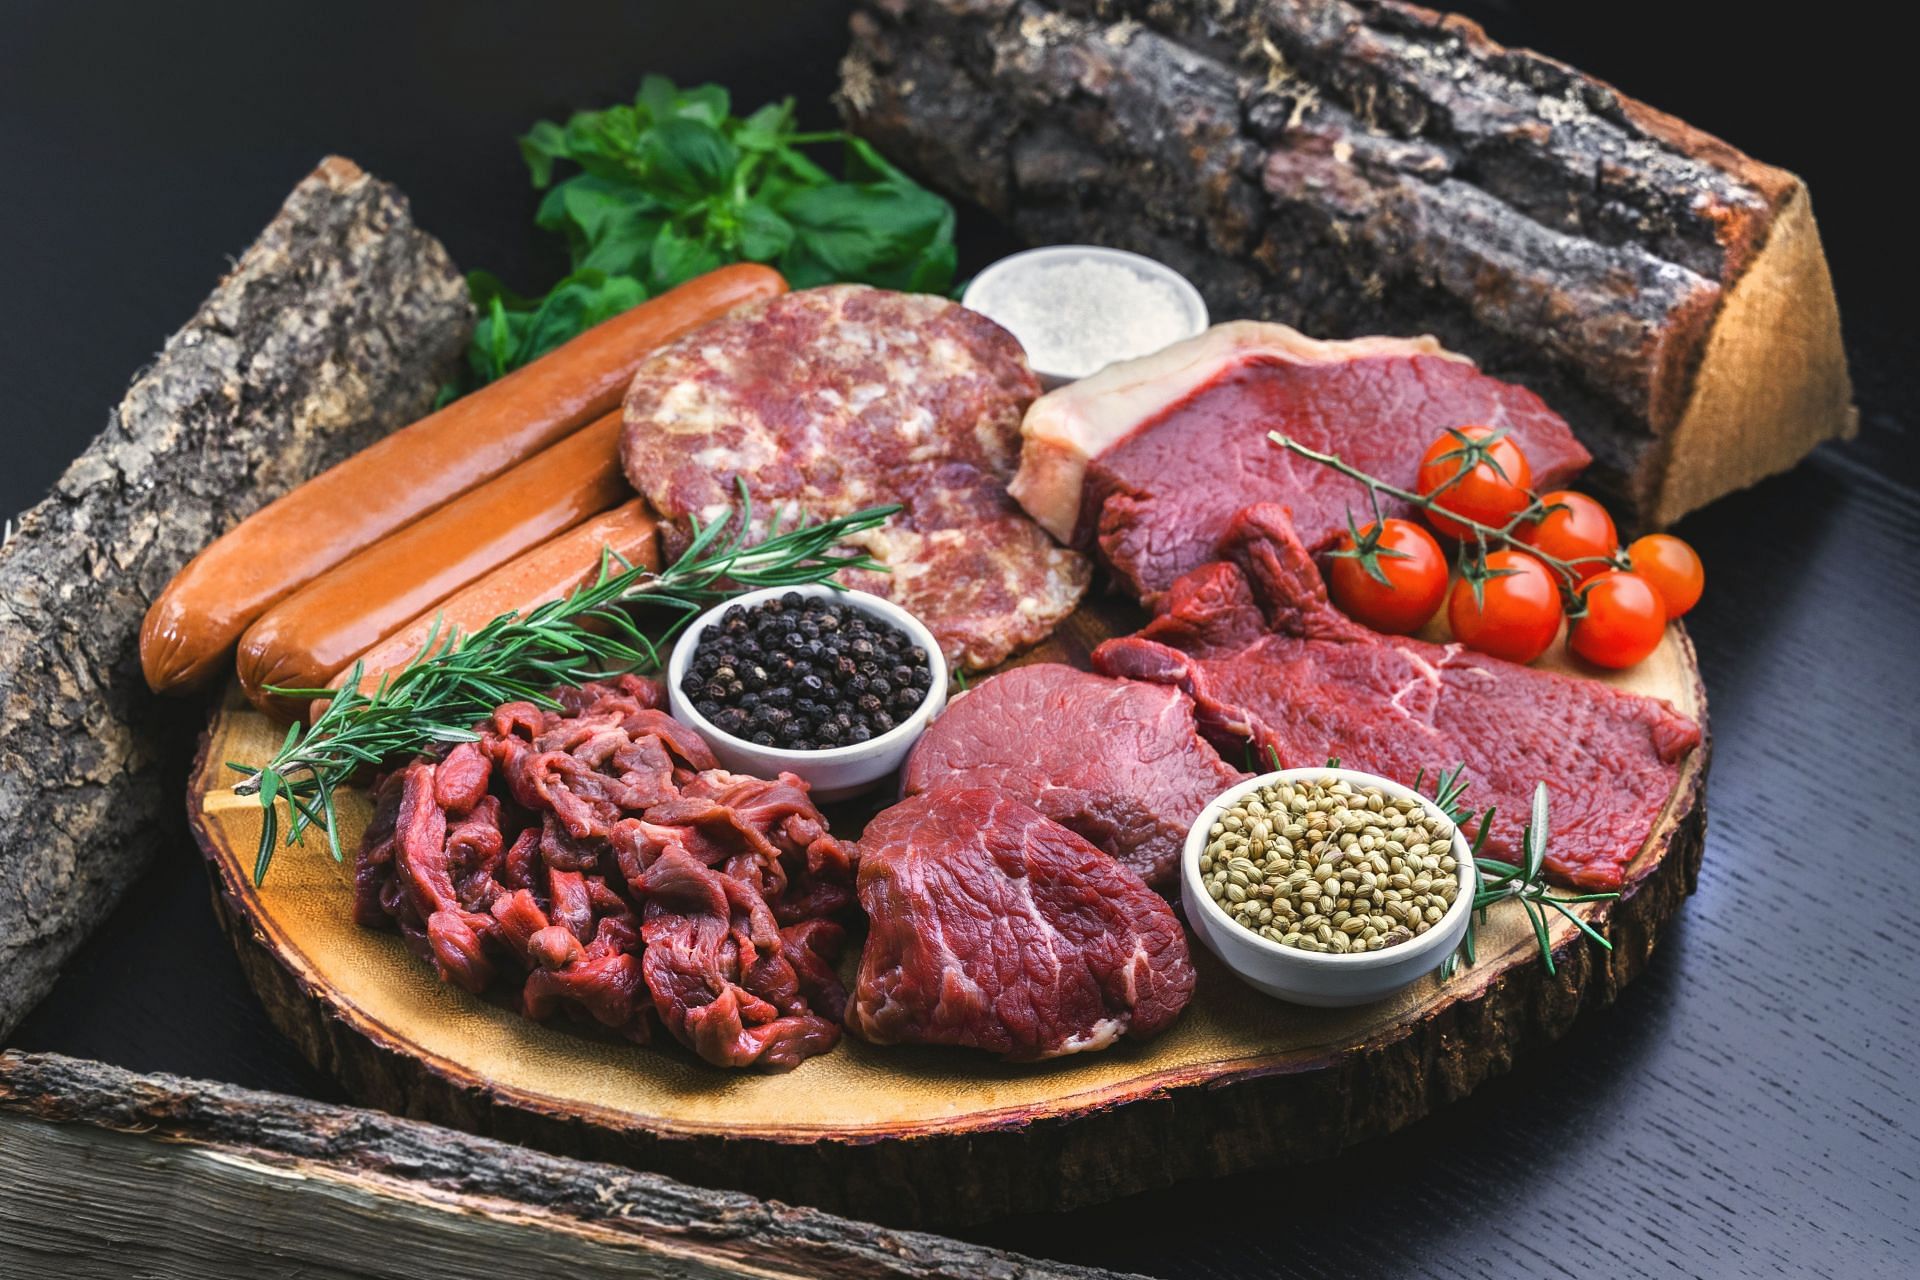 Meat is among the best foods to boost muscle recovery (Image via Unsplash/Eiliv Aceron)